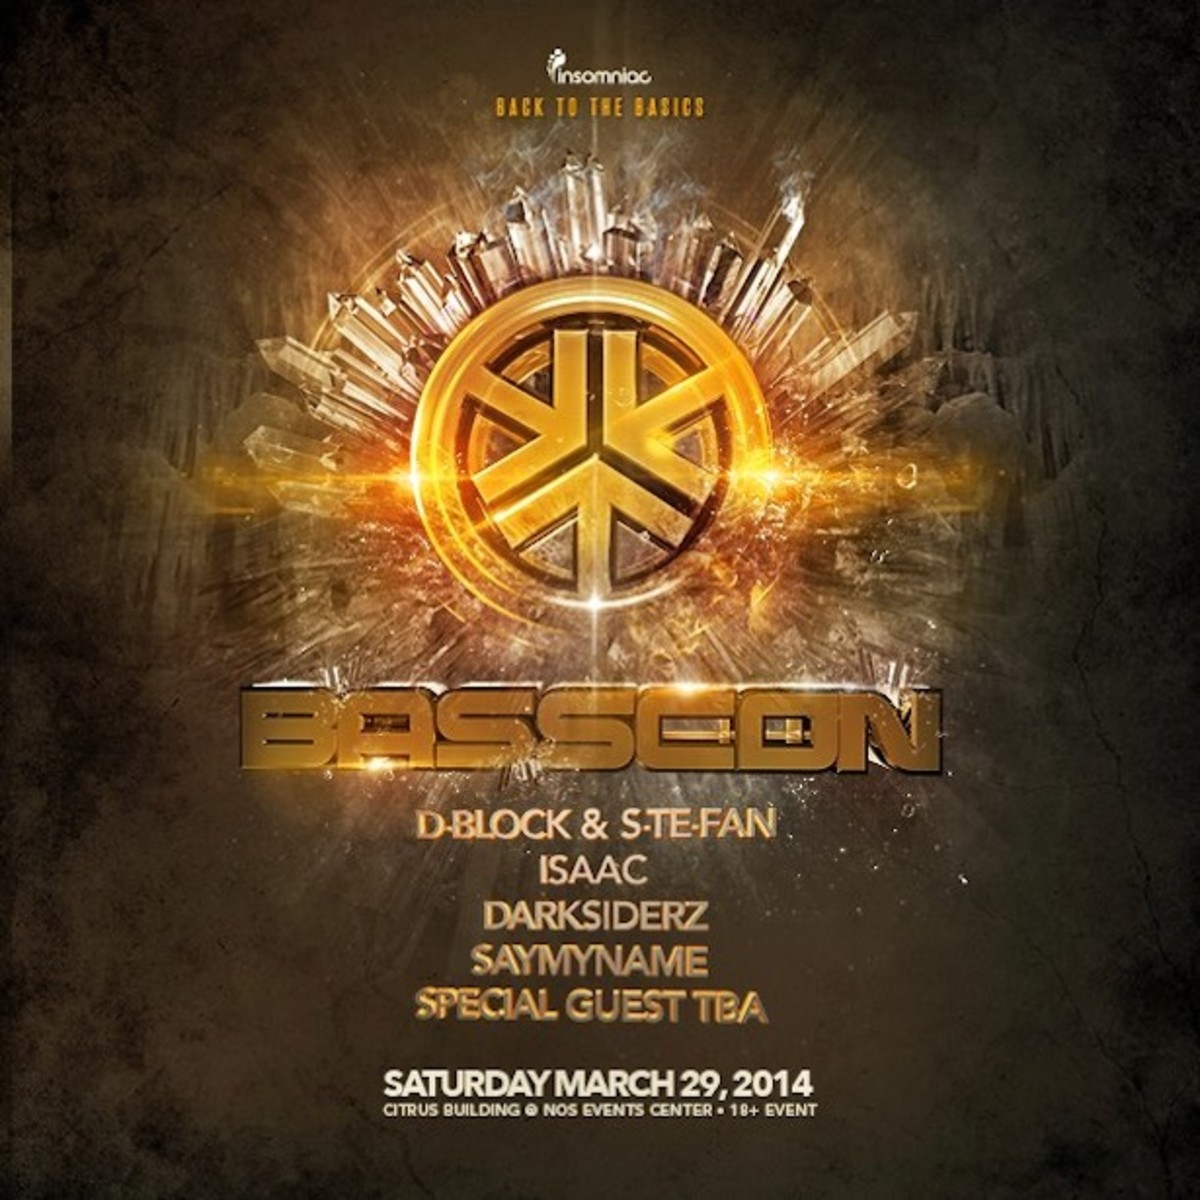 Insomniac Releases Basscon Massive Lineup With Isaac, D-Block & S-Te-Fan and More - EDM News